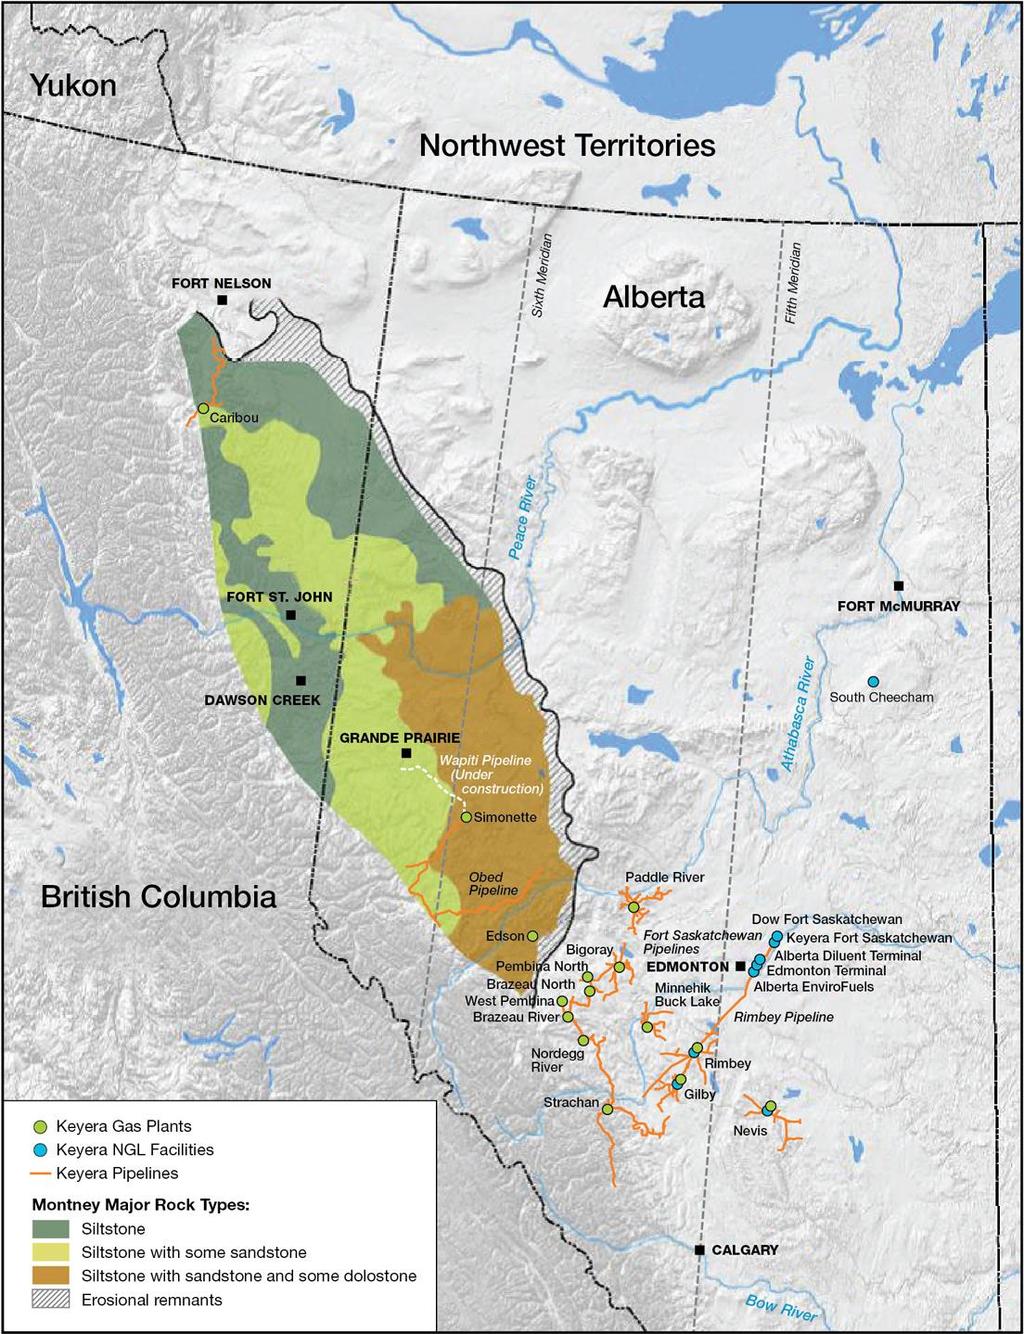 Montney A World Class Resource Large portion of western Canadian natural gas production currently coming from the Montney Horizontal drilling / multi-stage completions enabled economic development